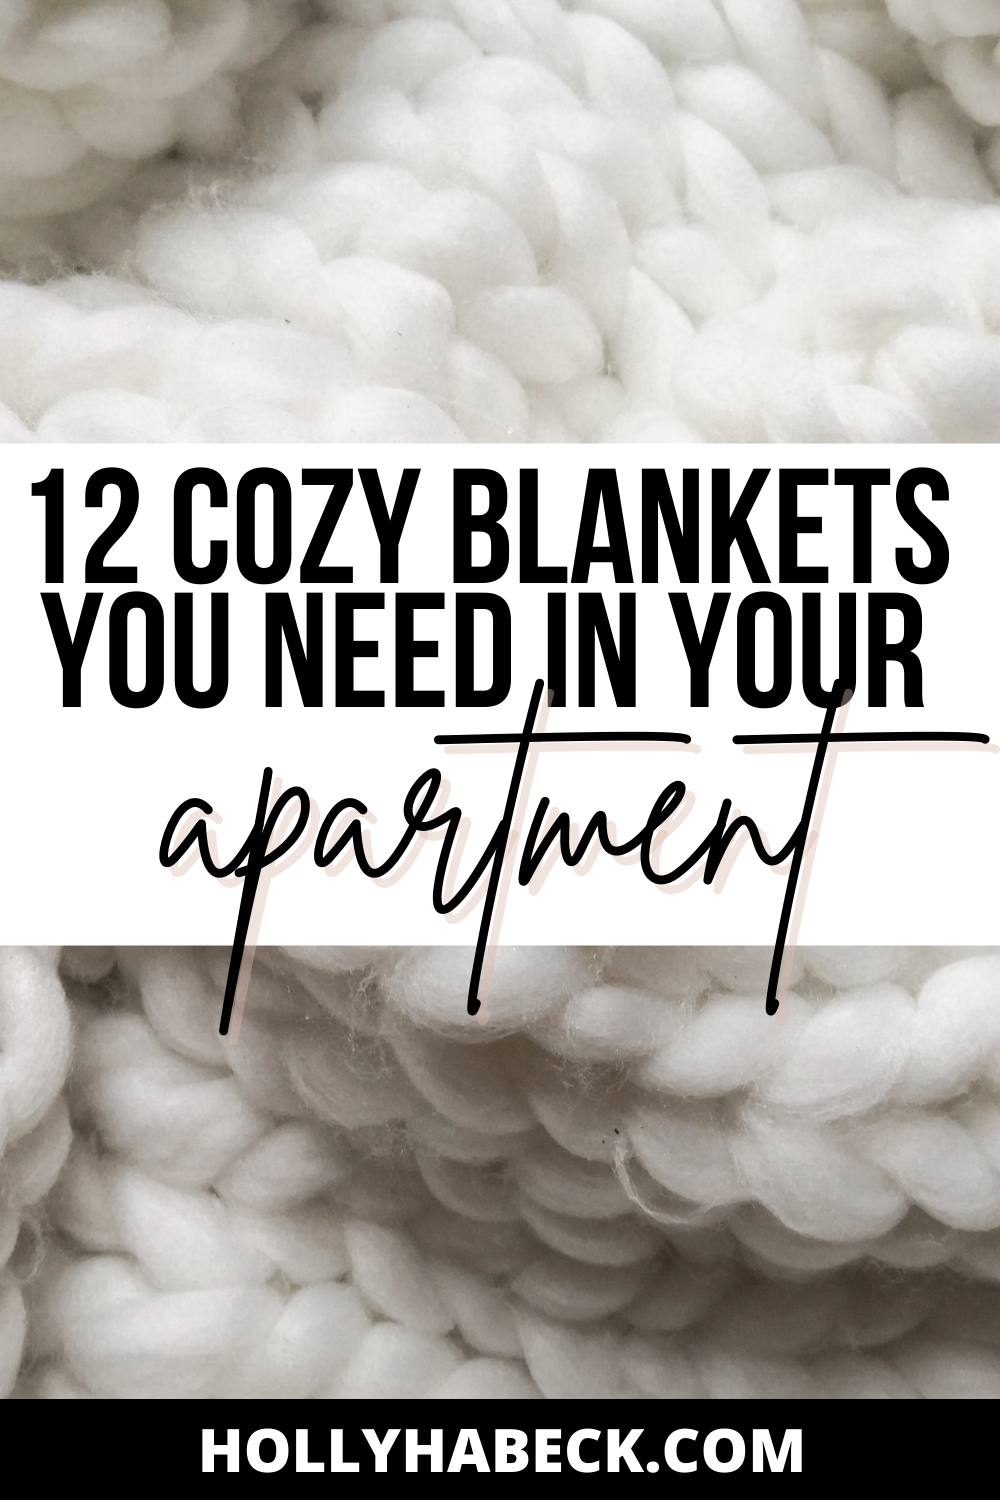 12 Cozy Blankets You Need in Your Apartment